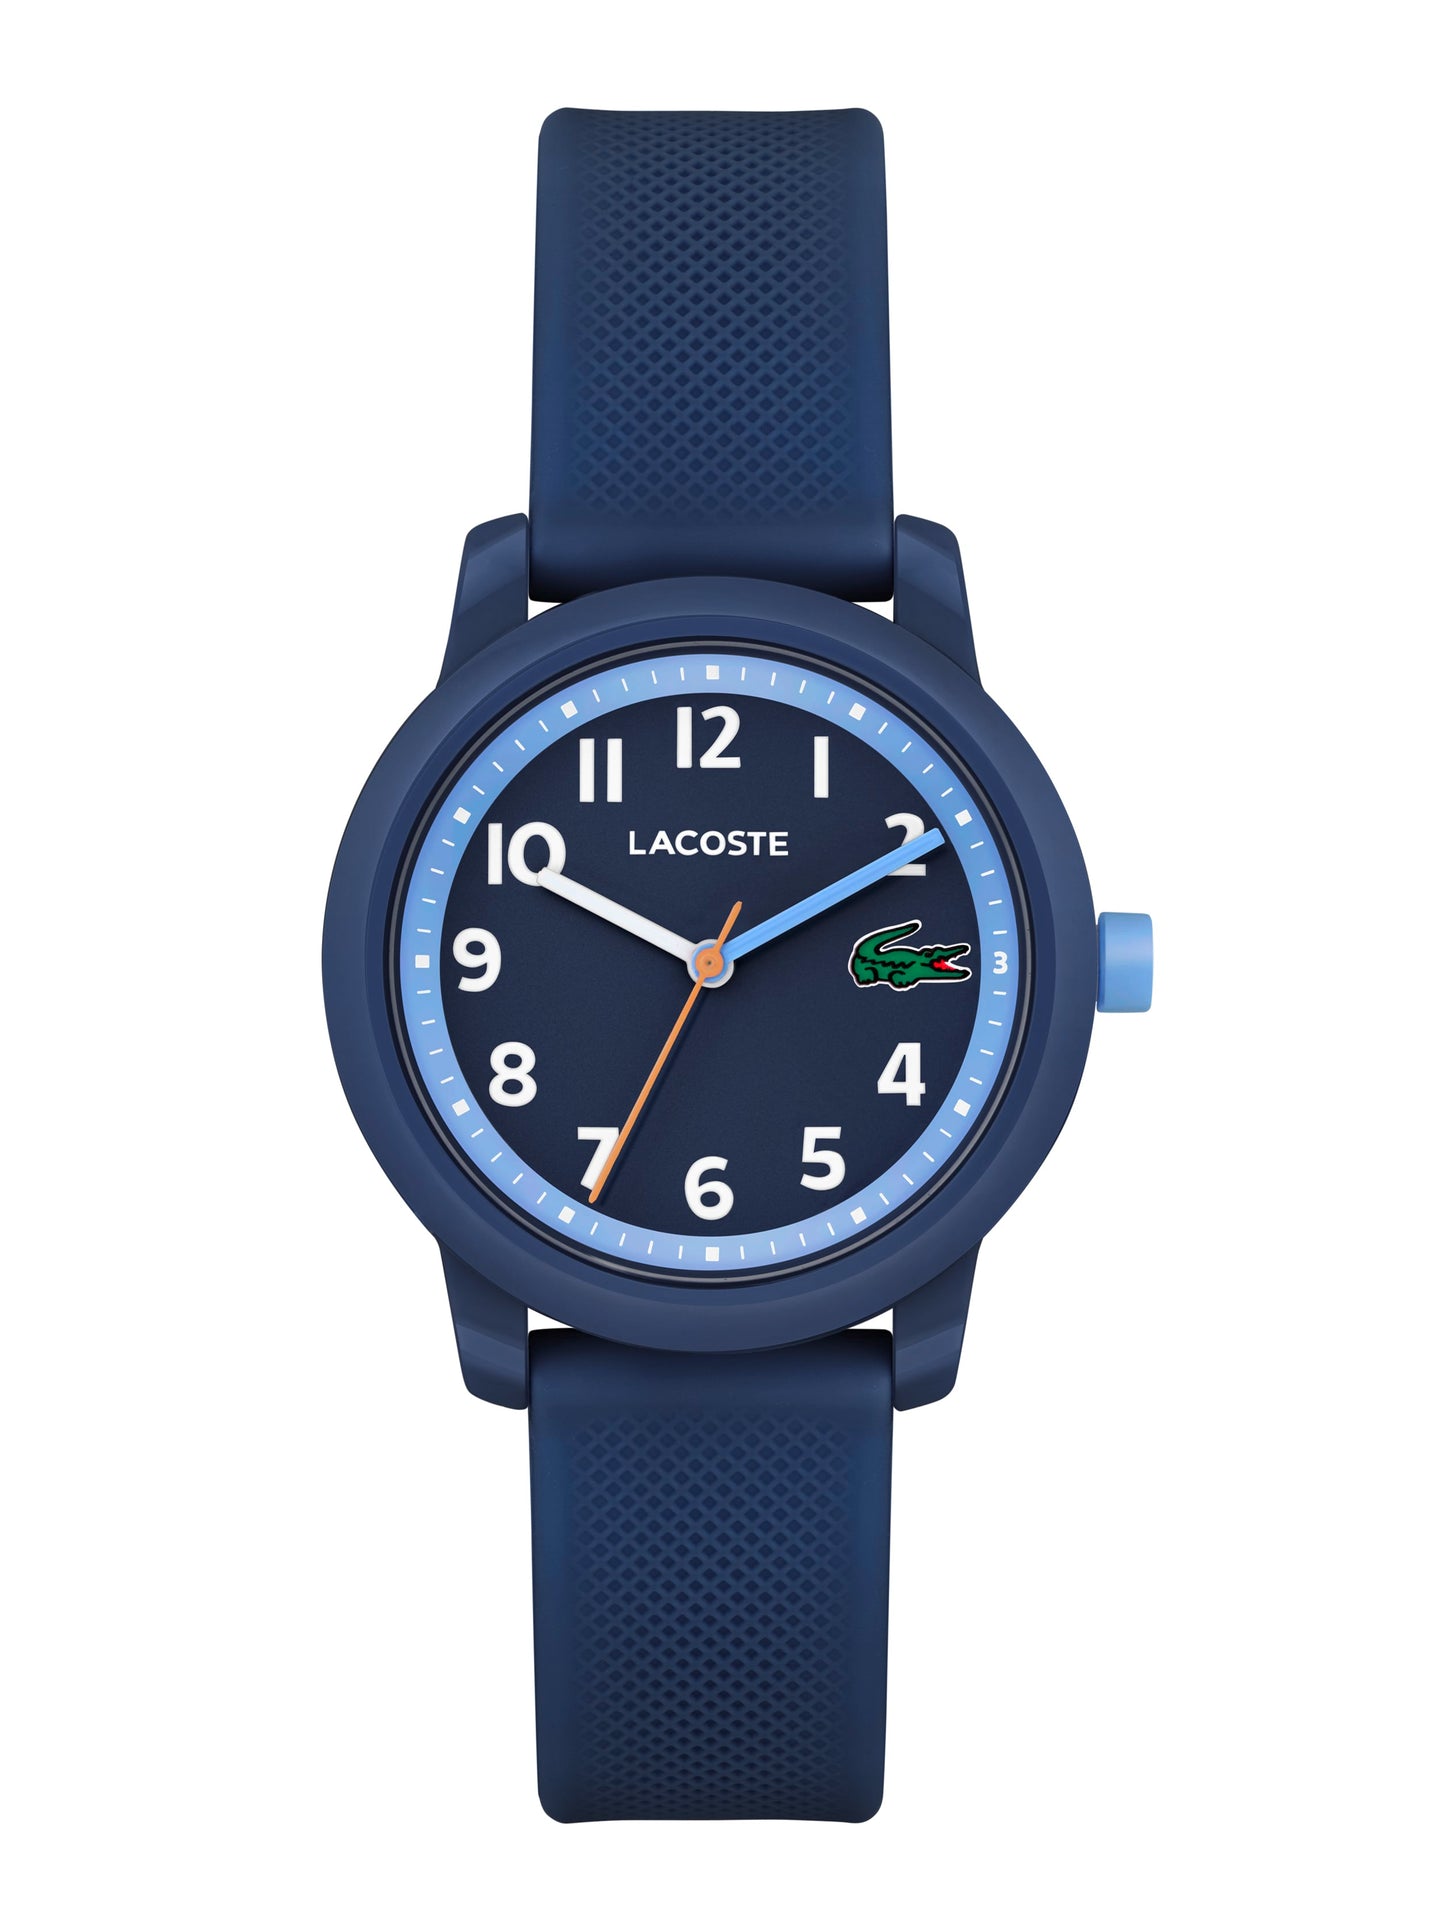 This is a product description for the Lacoste Kids Lacoste.12.12 Blue Watch 2030043. With its signature Lacoste branding and high-quality silicone band, this watch is perfect for stylish men who value both fashion and functionality. Craft